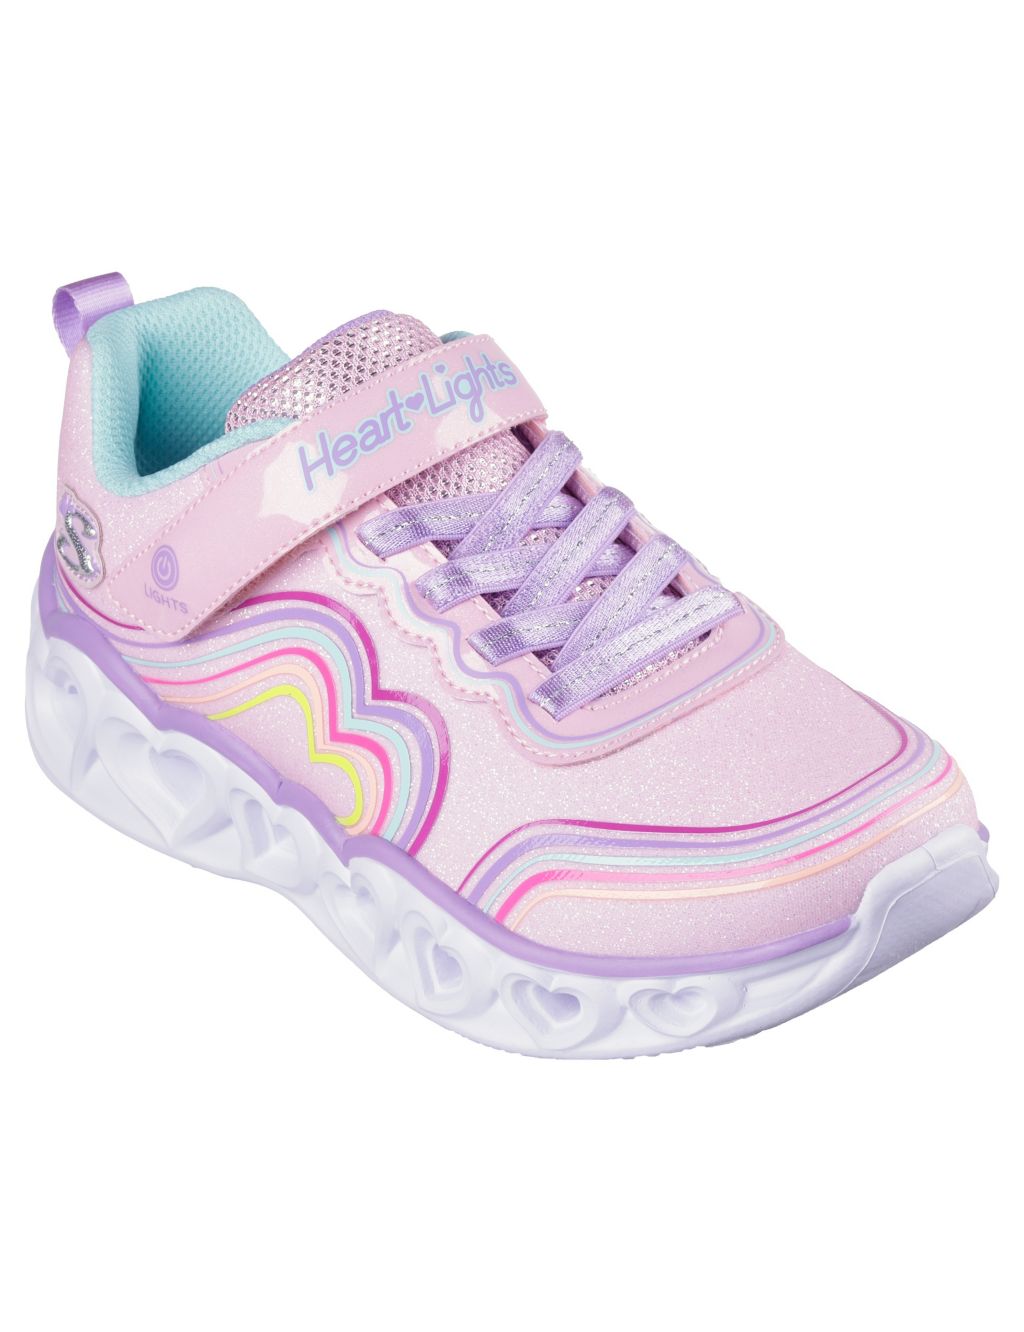 Glitter Light Up Trainers (9.5 Small - 3 Large) image 2